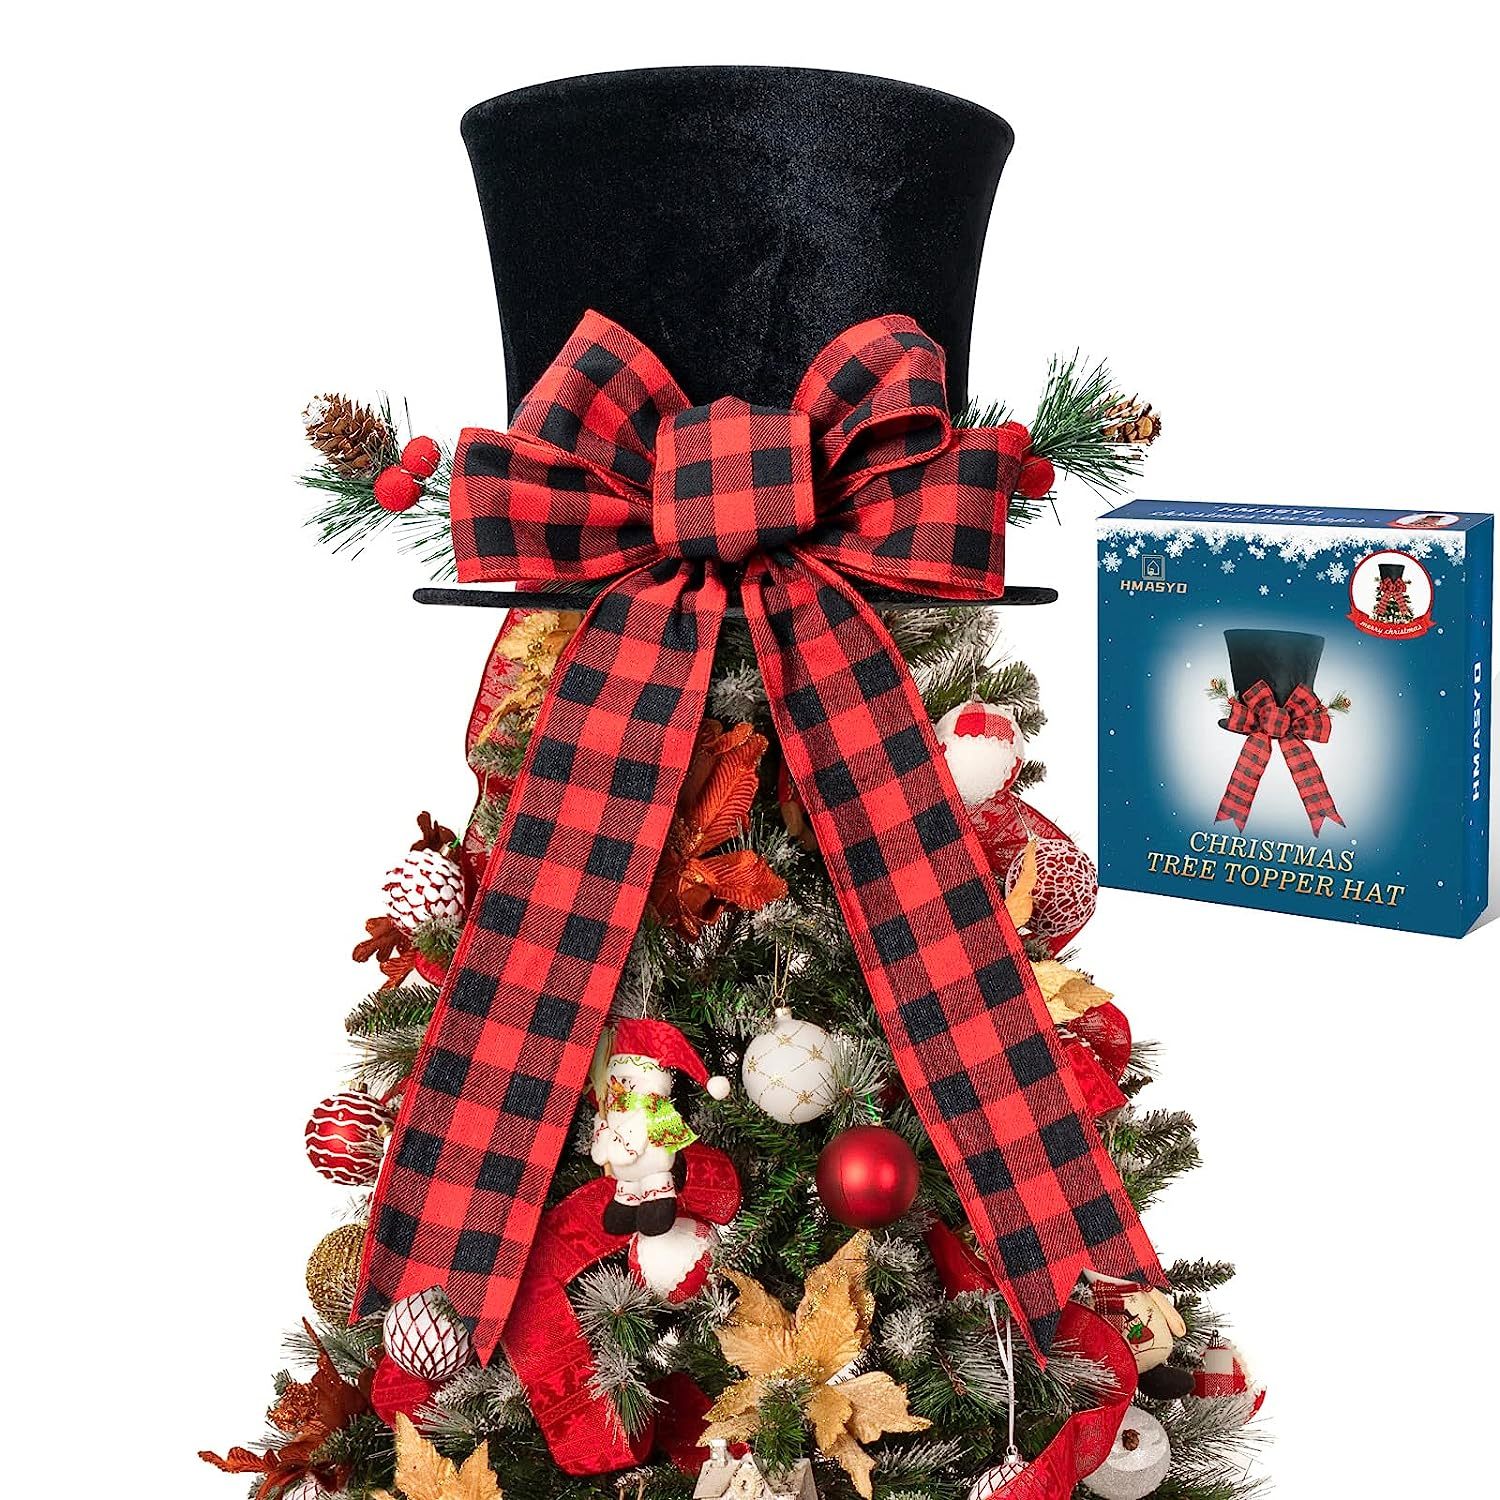 Primary image for Christmas Tree Topper - Upgrade Large Black Tree Topper Hat With Red Buffalo Pla